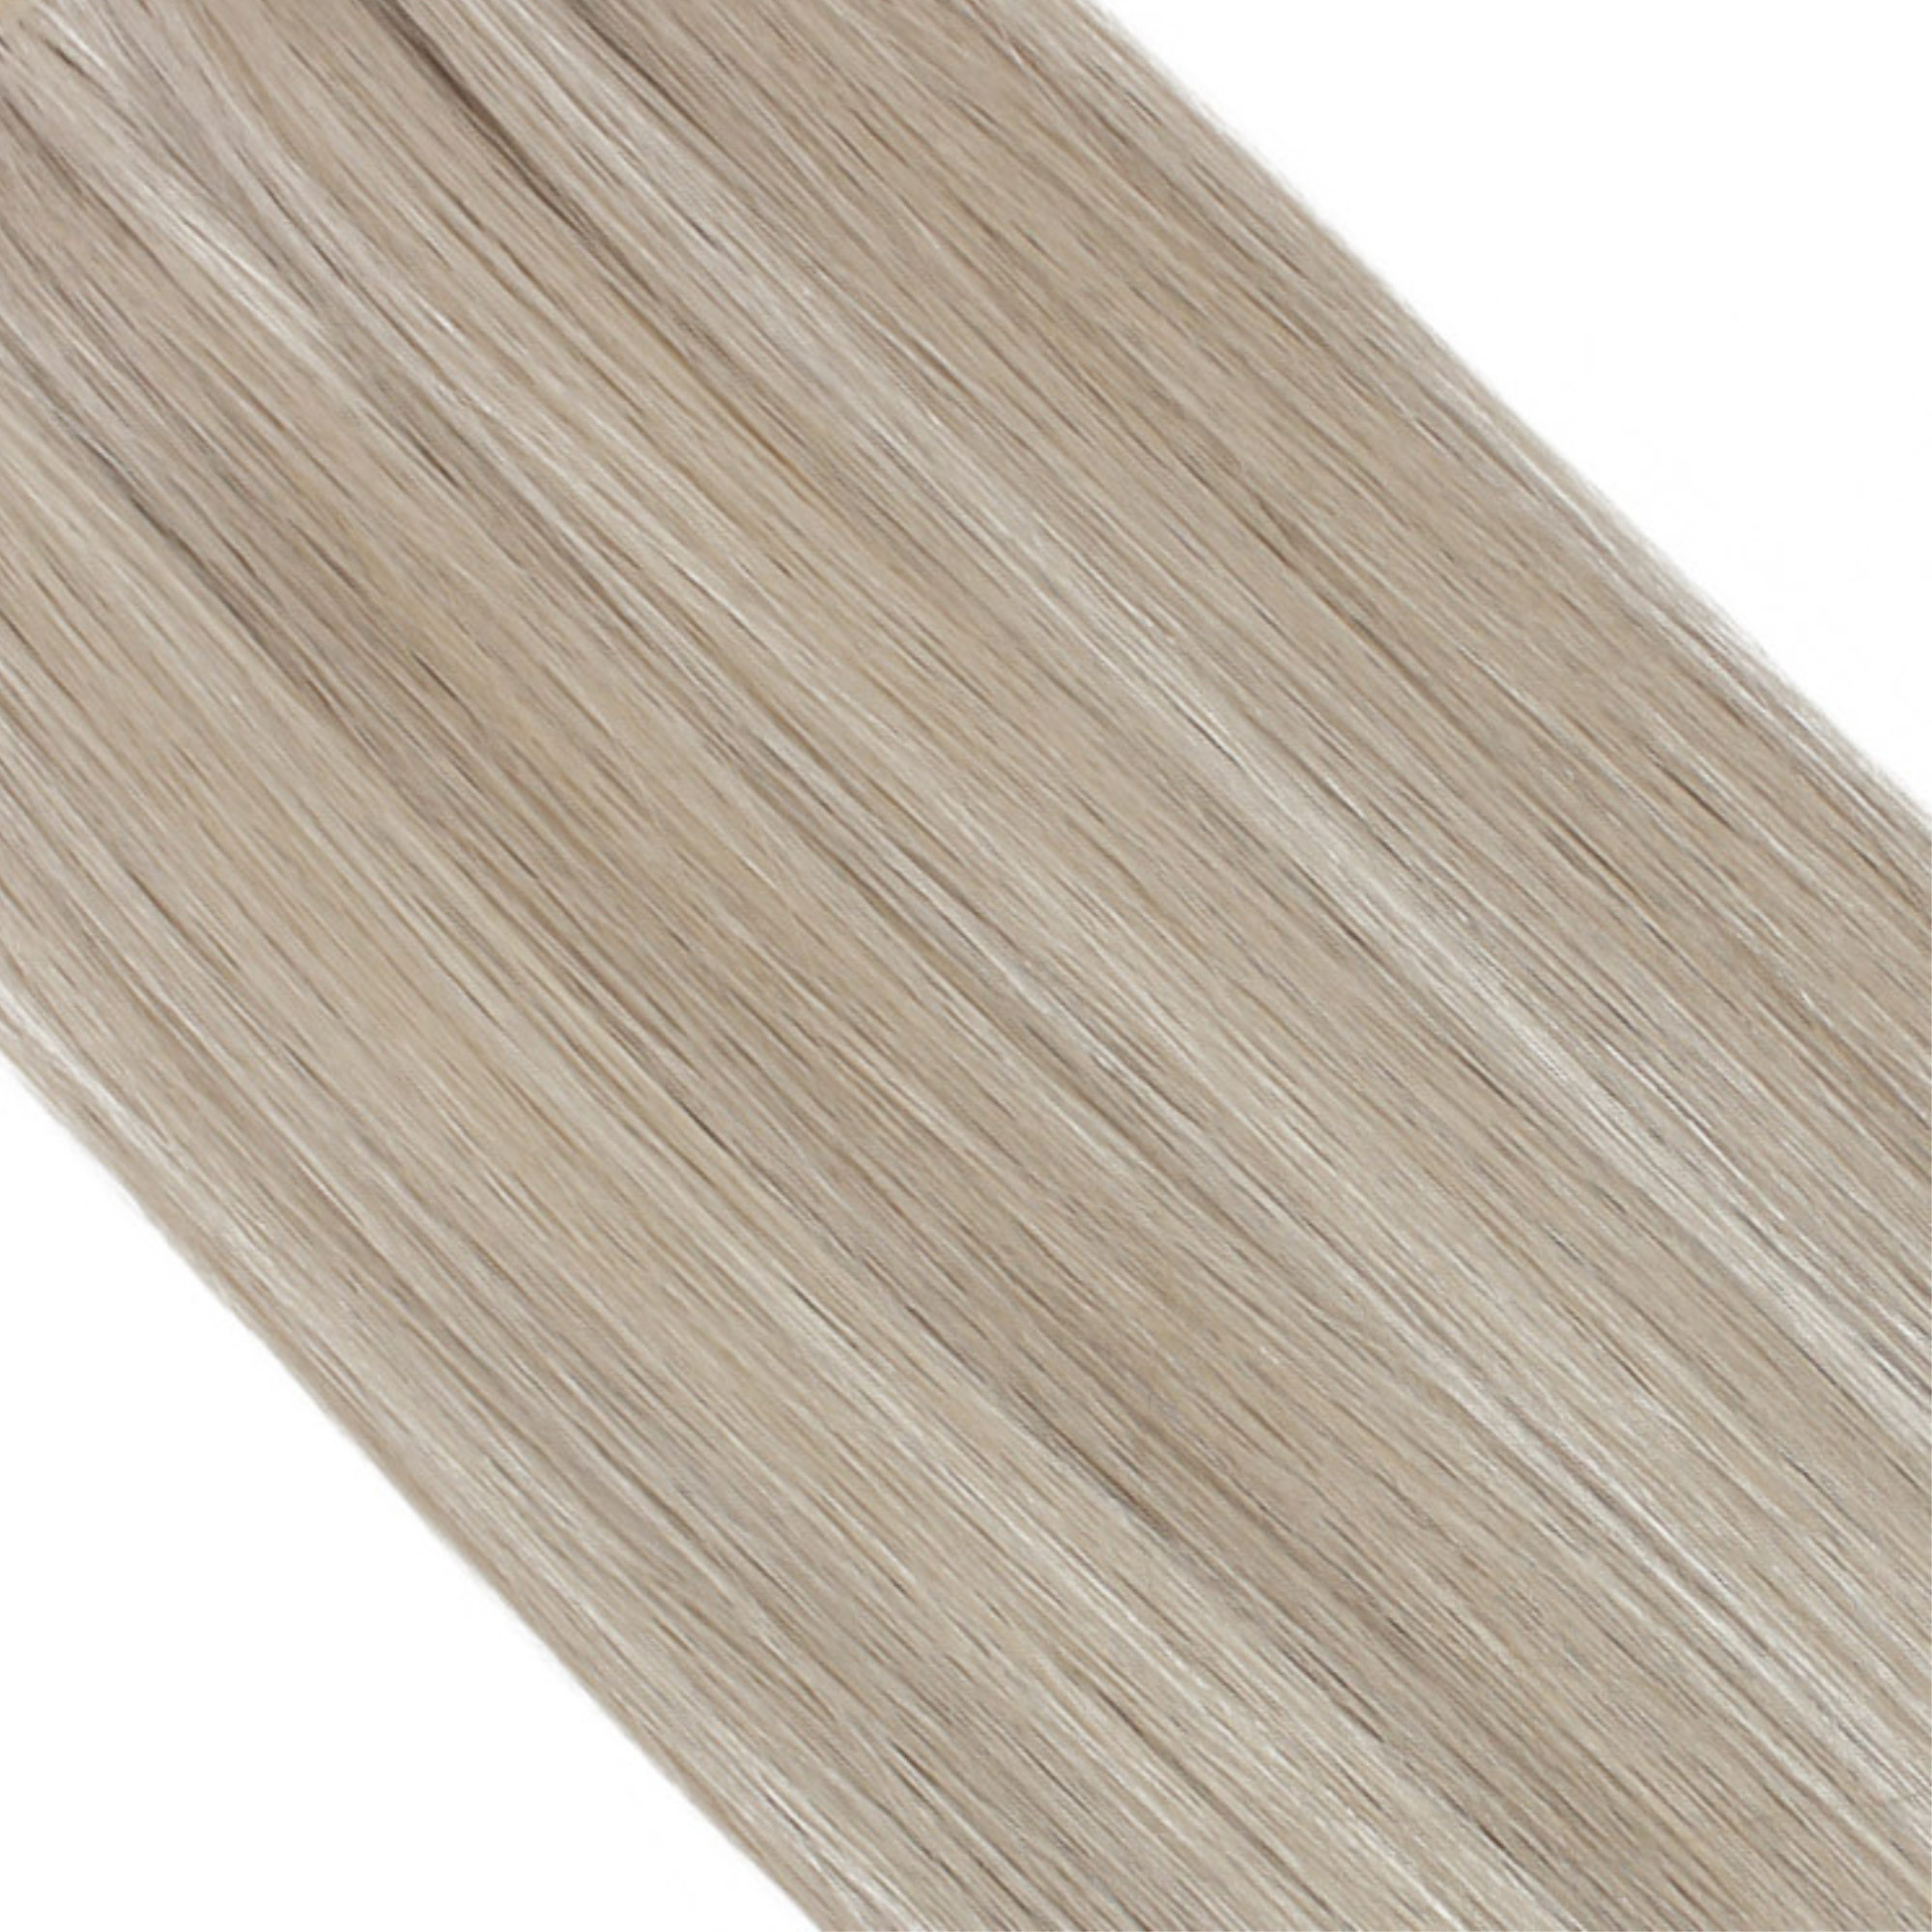 "hair rehab london 18" weft hair extensions shade swatch titled steel blonde"